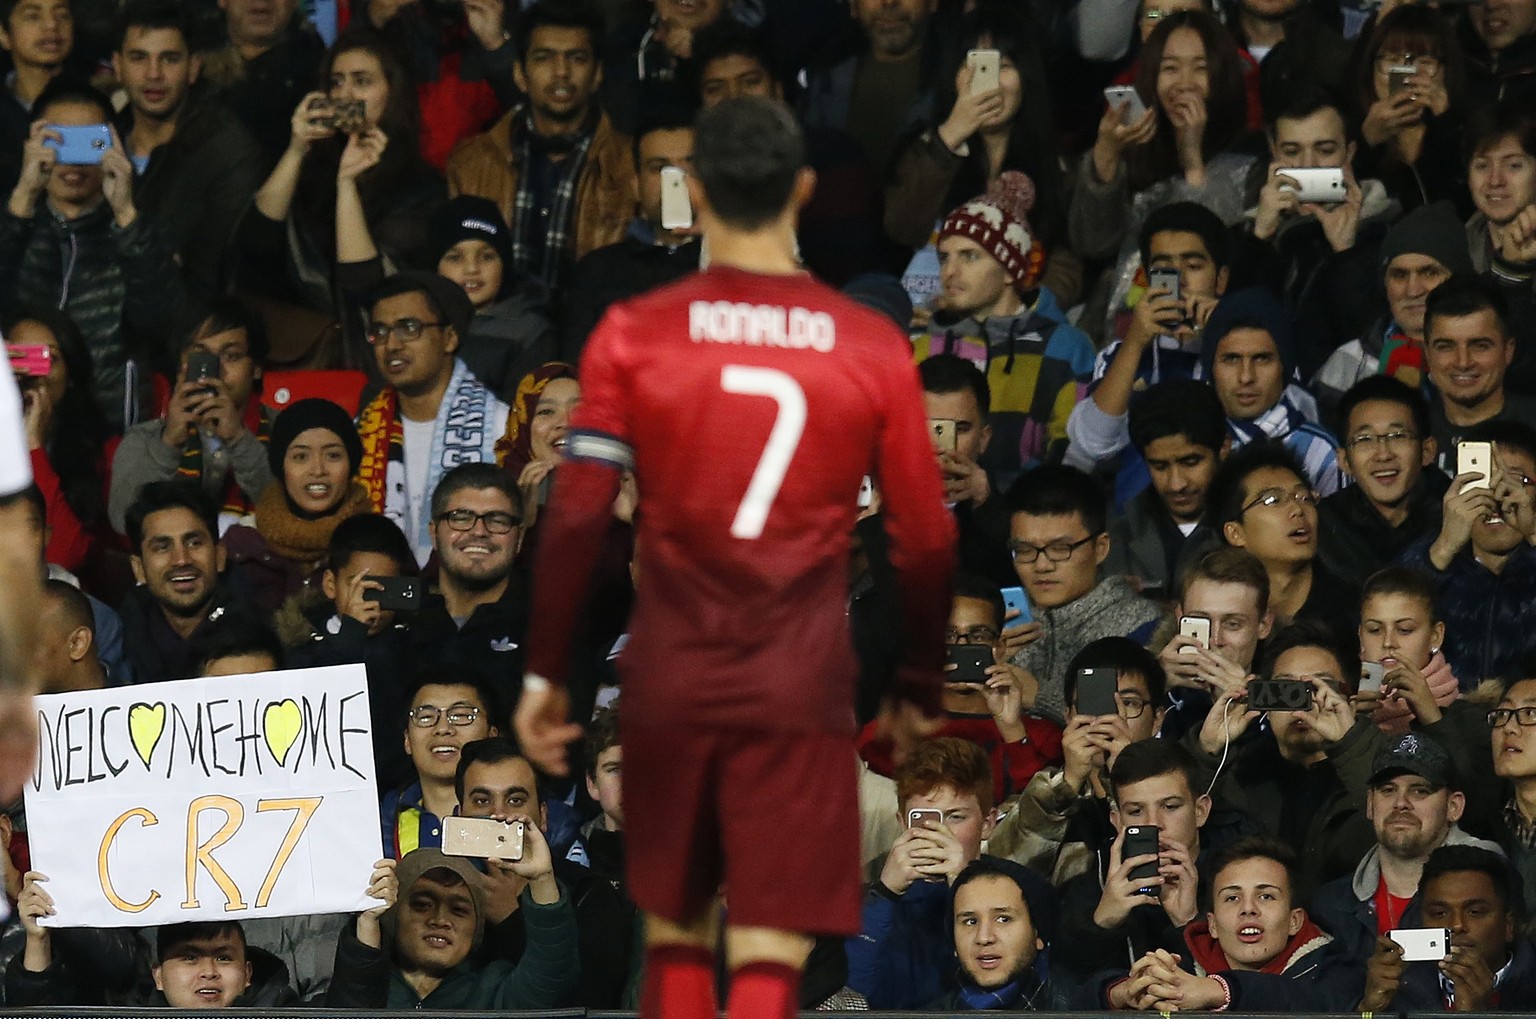 Fans take photos and hold a placard supporting Cristiano Ronaldo of Portugal, a former Manchester United player, during the International Friendly soccer match against Argentina at Old Trafford Stadiu ...